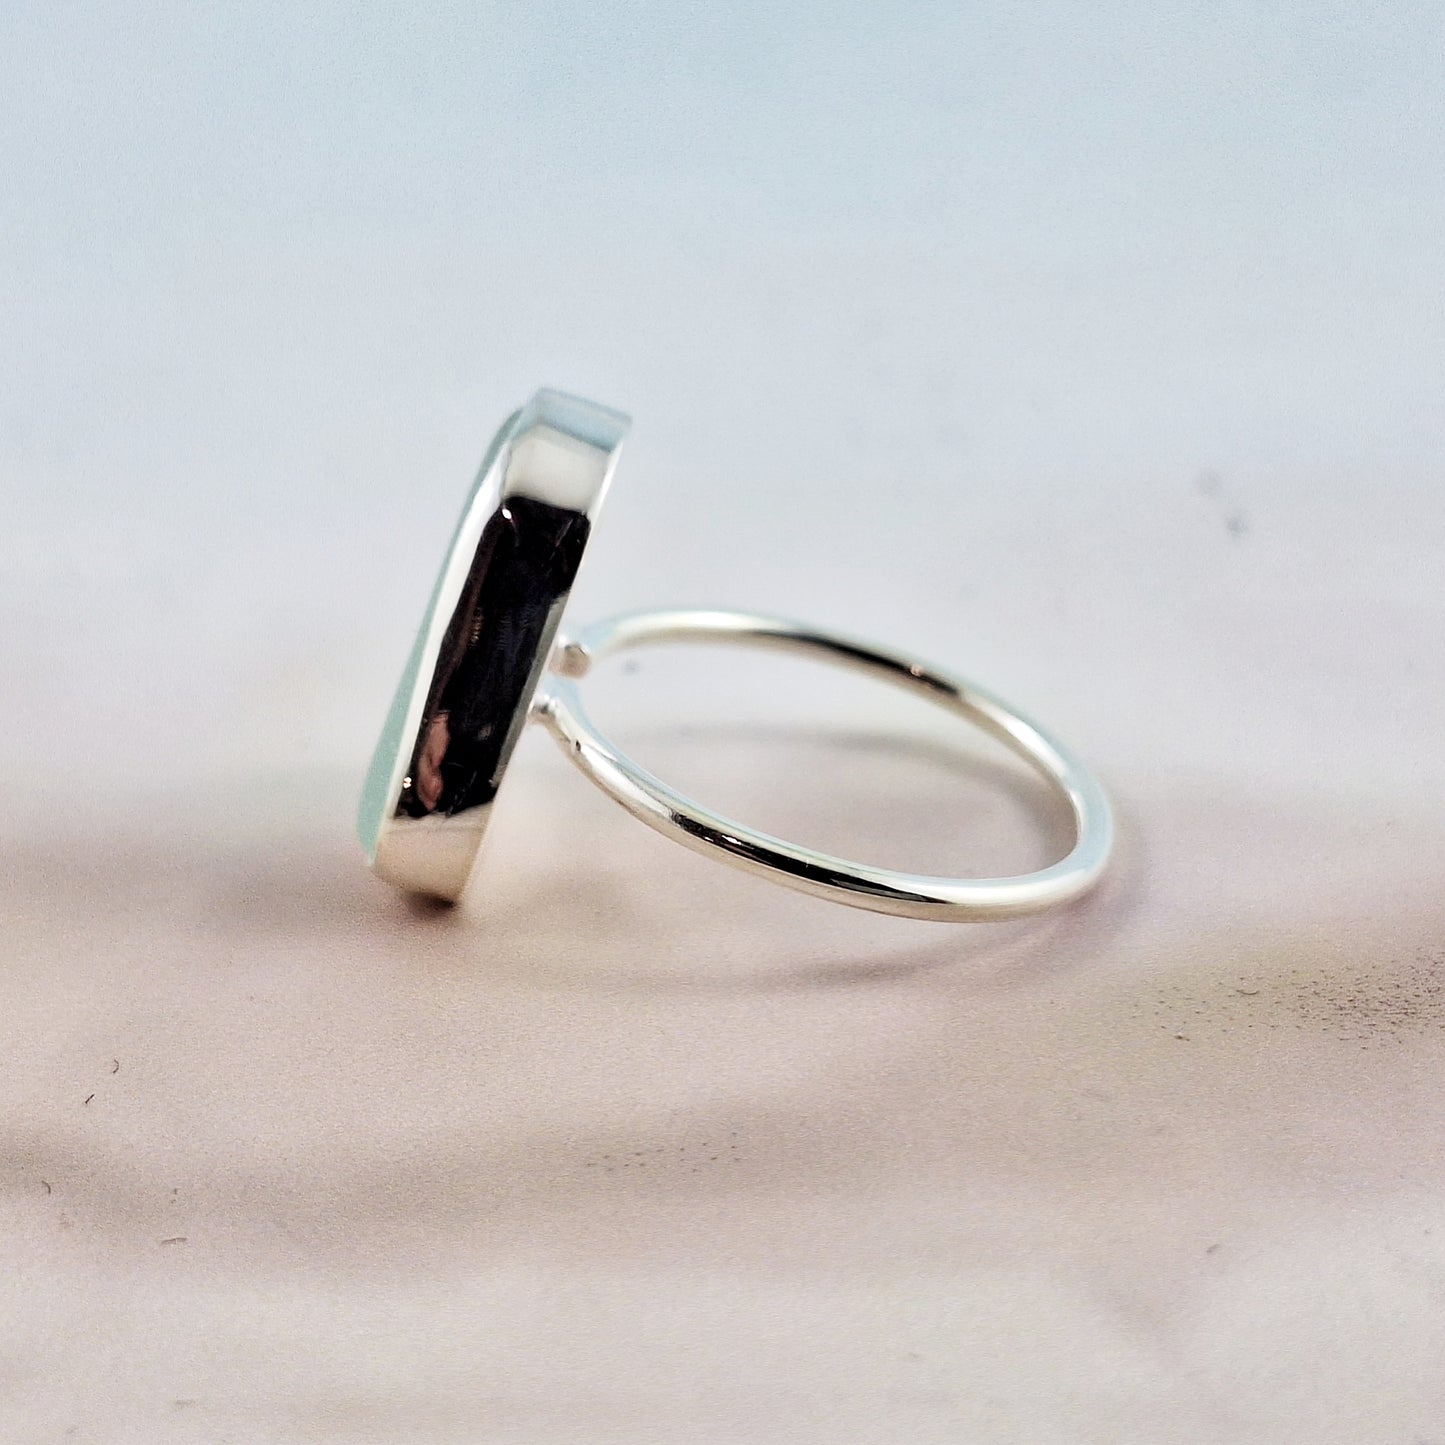 Ring size 9: Sea Mist Glass